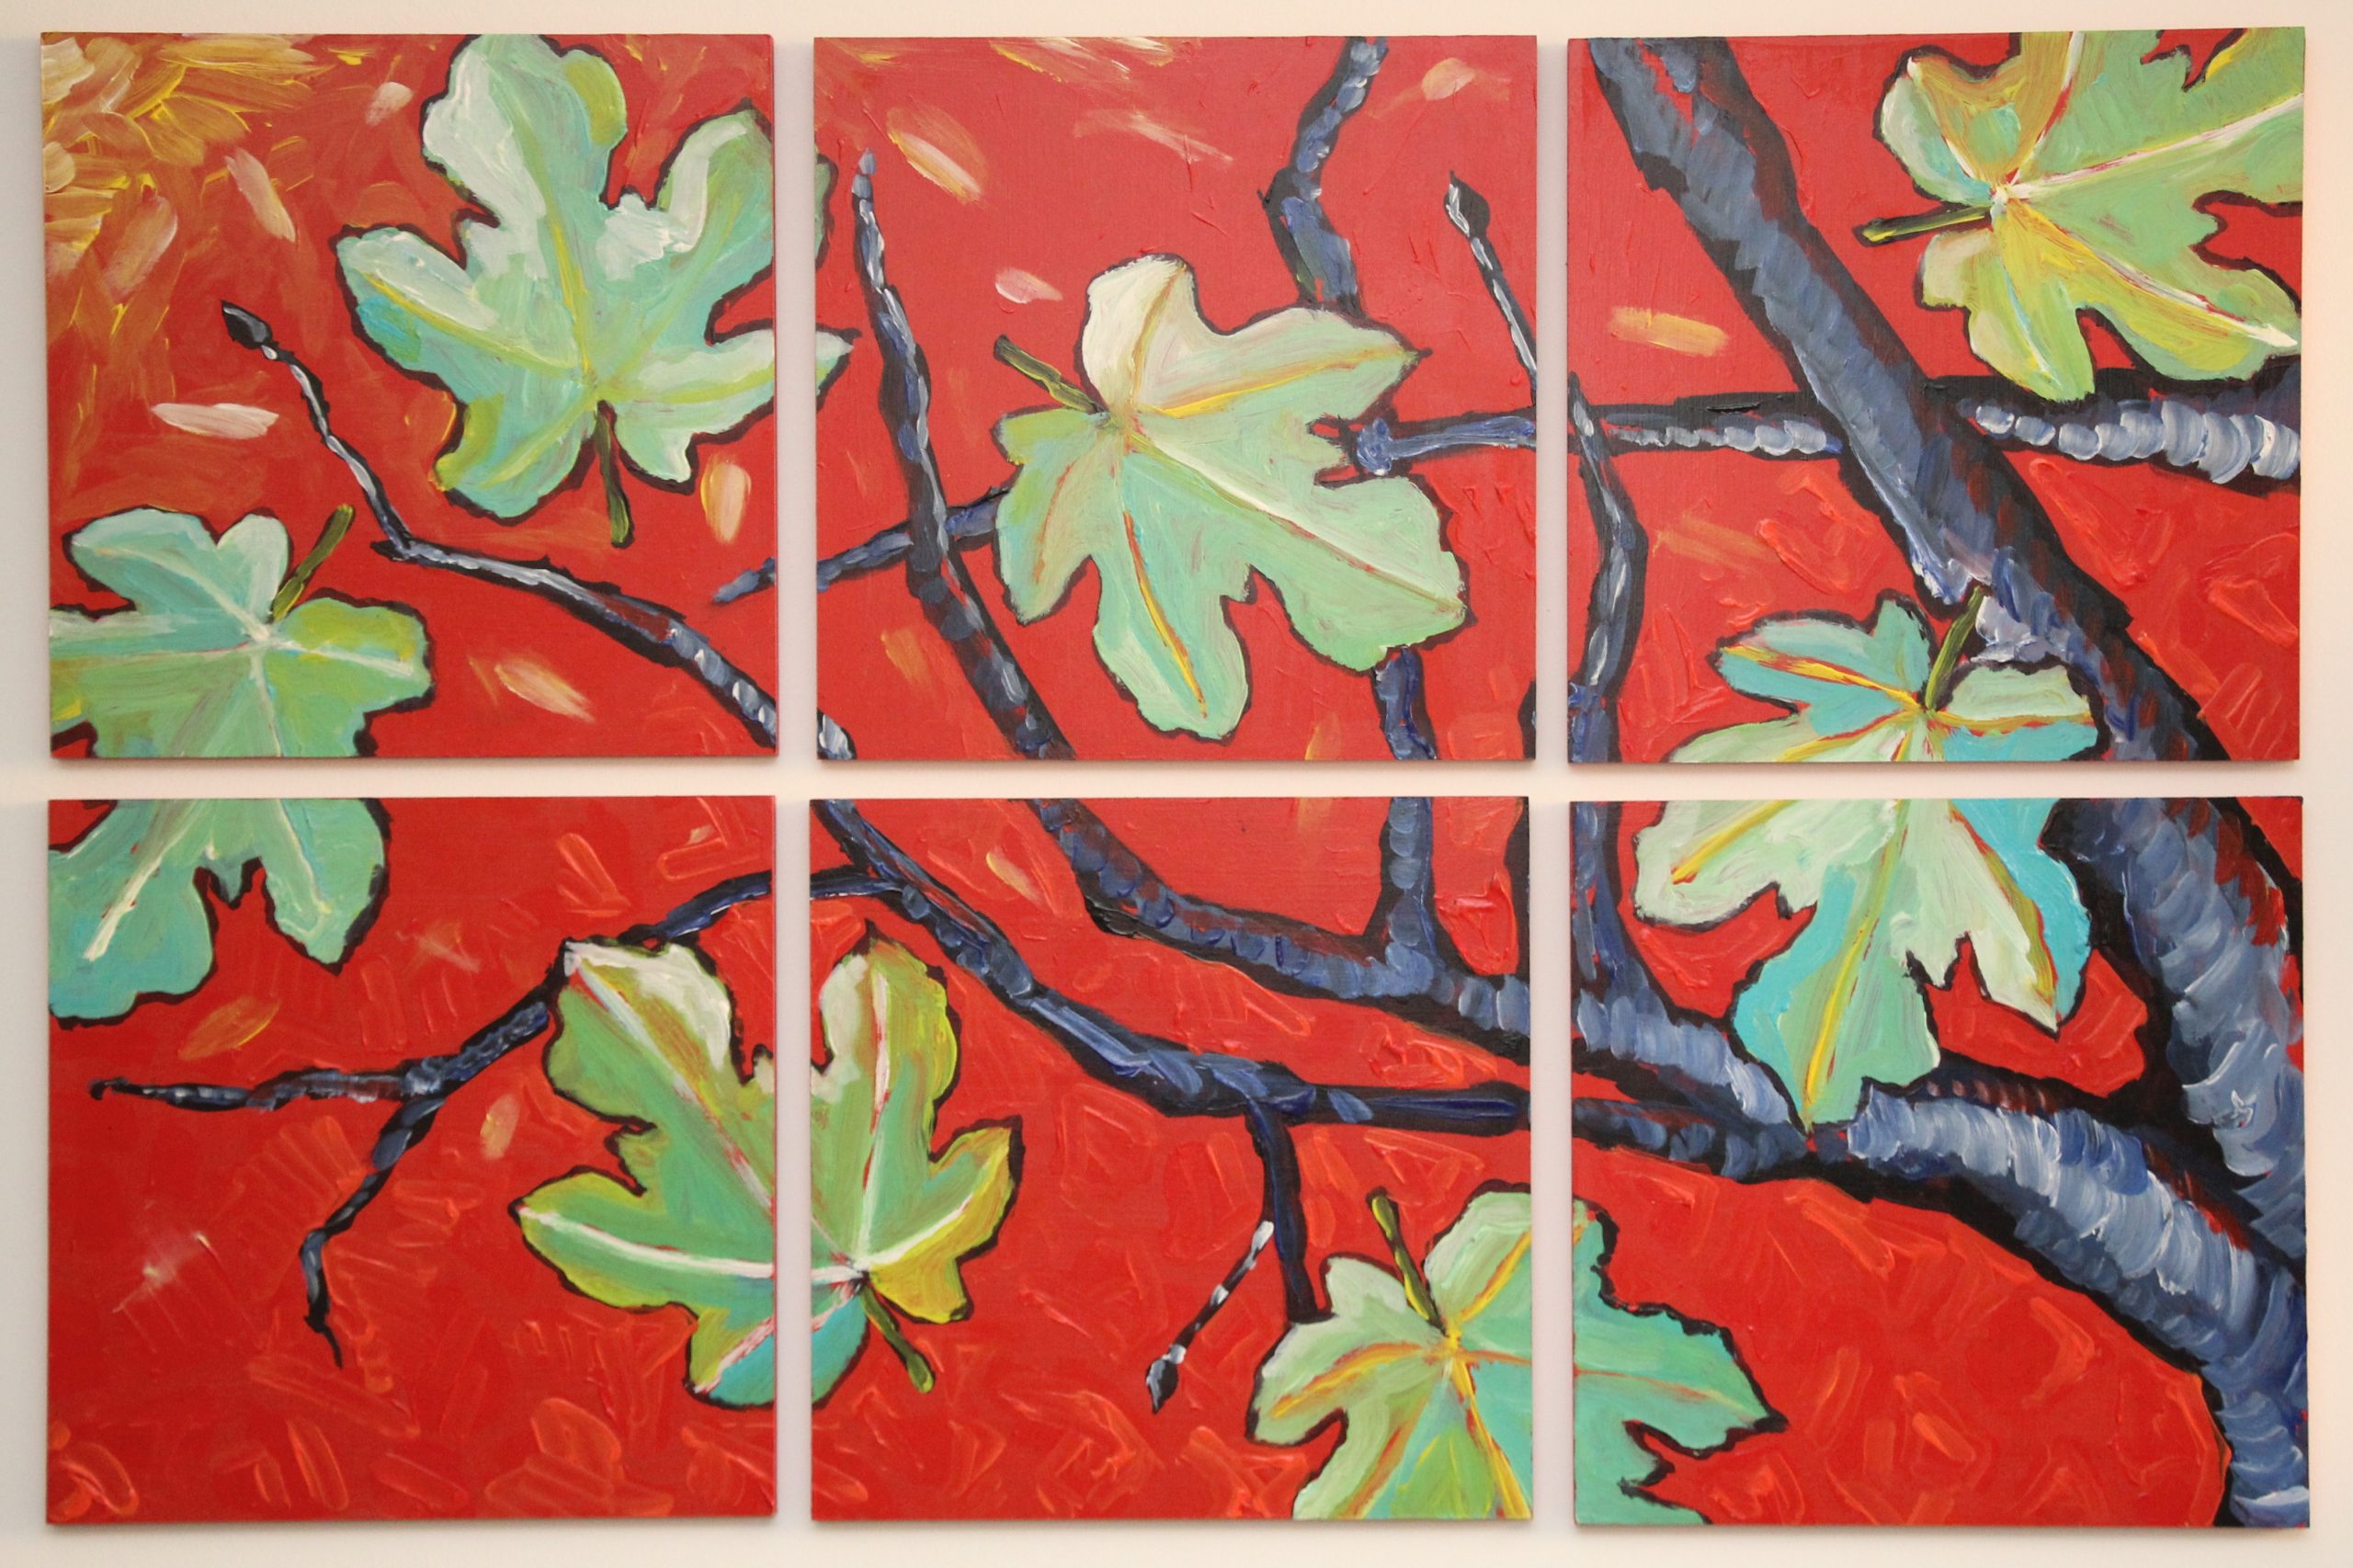 Figleaves 6 (2013)